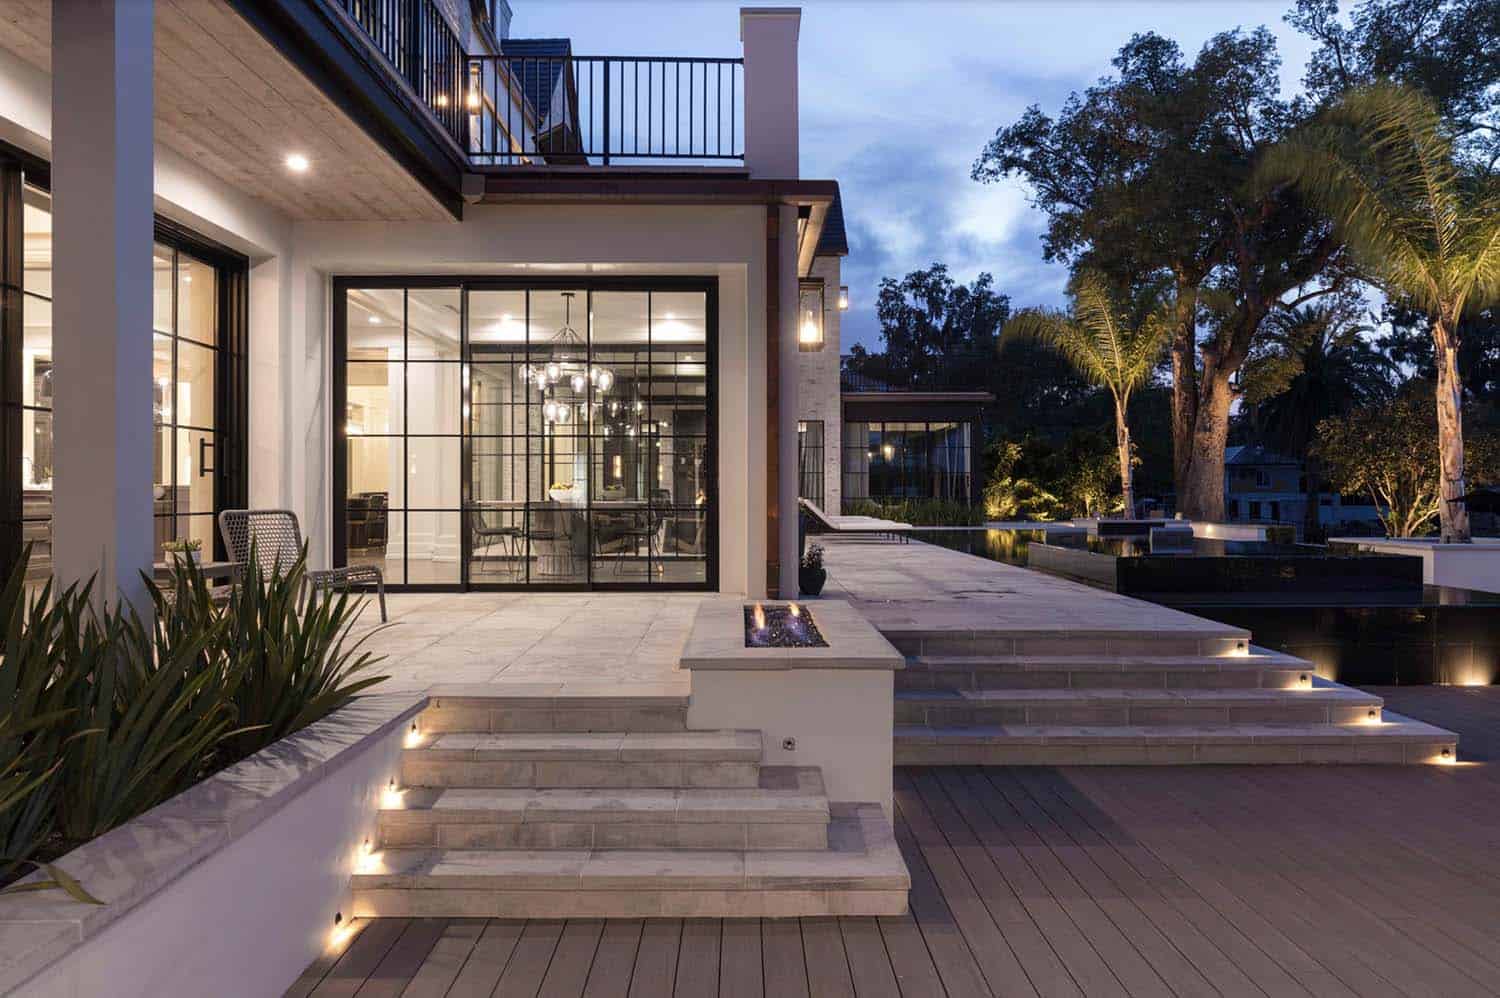 transitional style home exterior at dusk